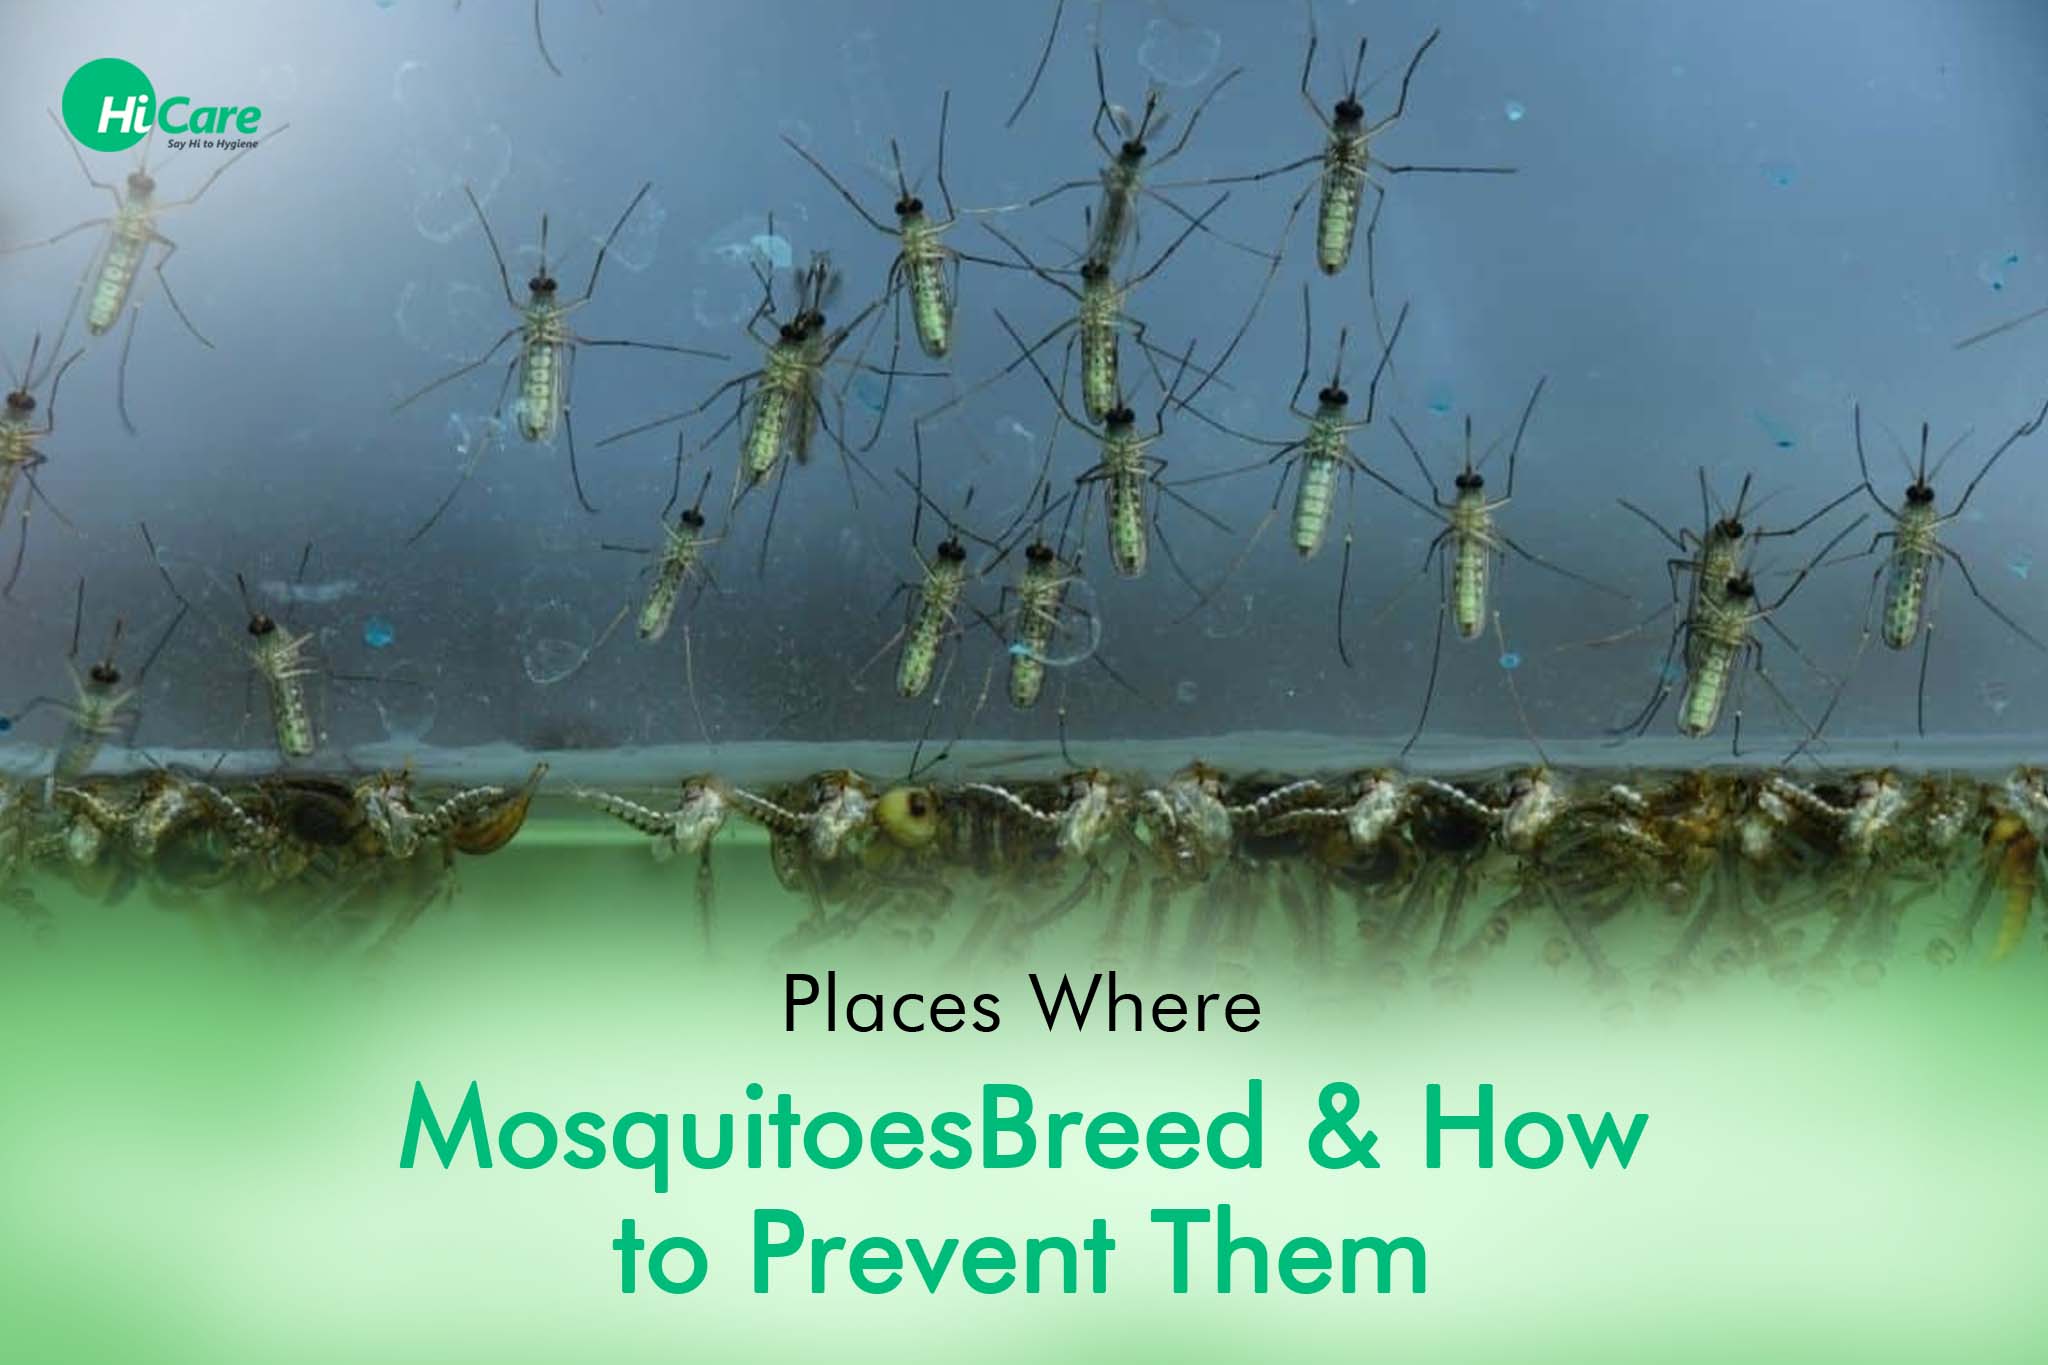 5 Places Where Mosquitoes Breed and How to Prevent Them